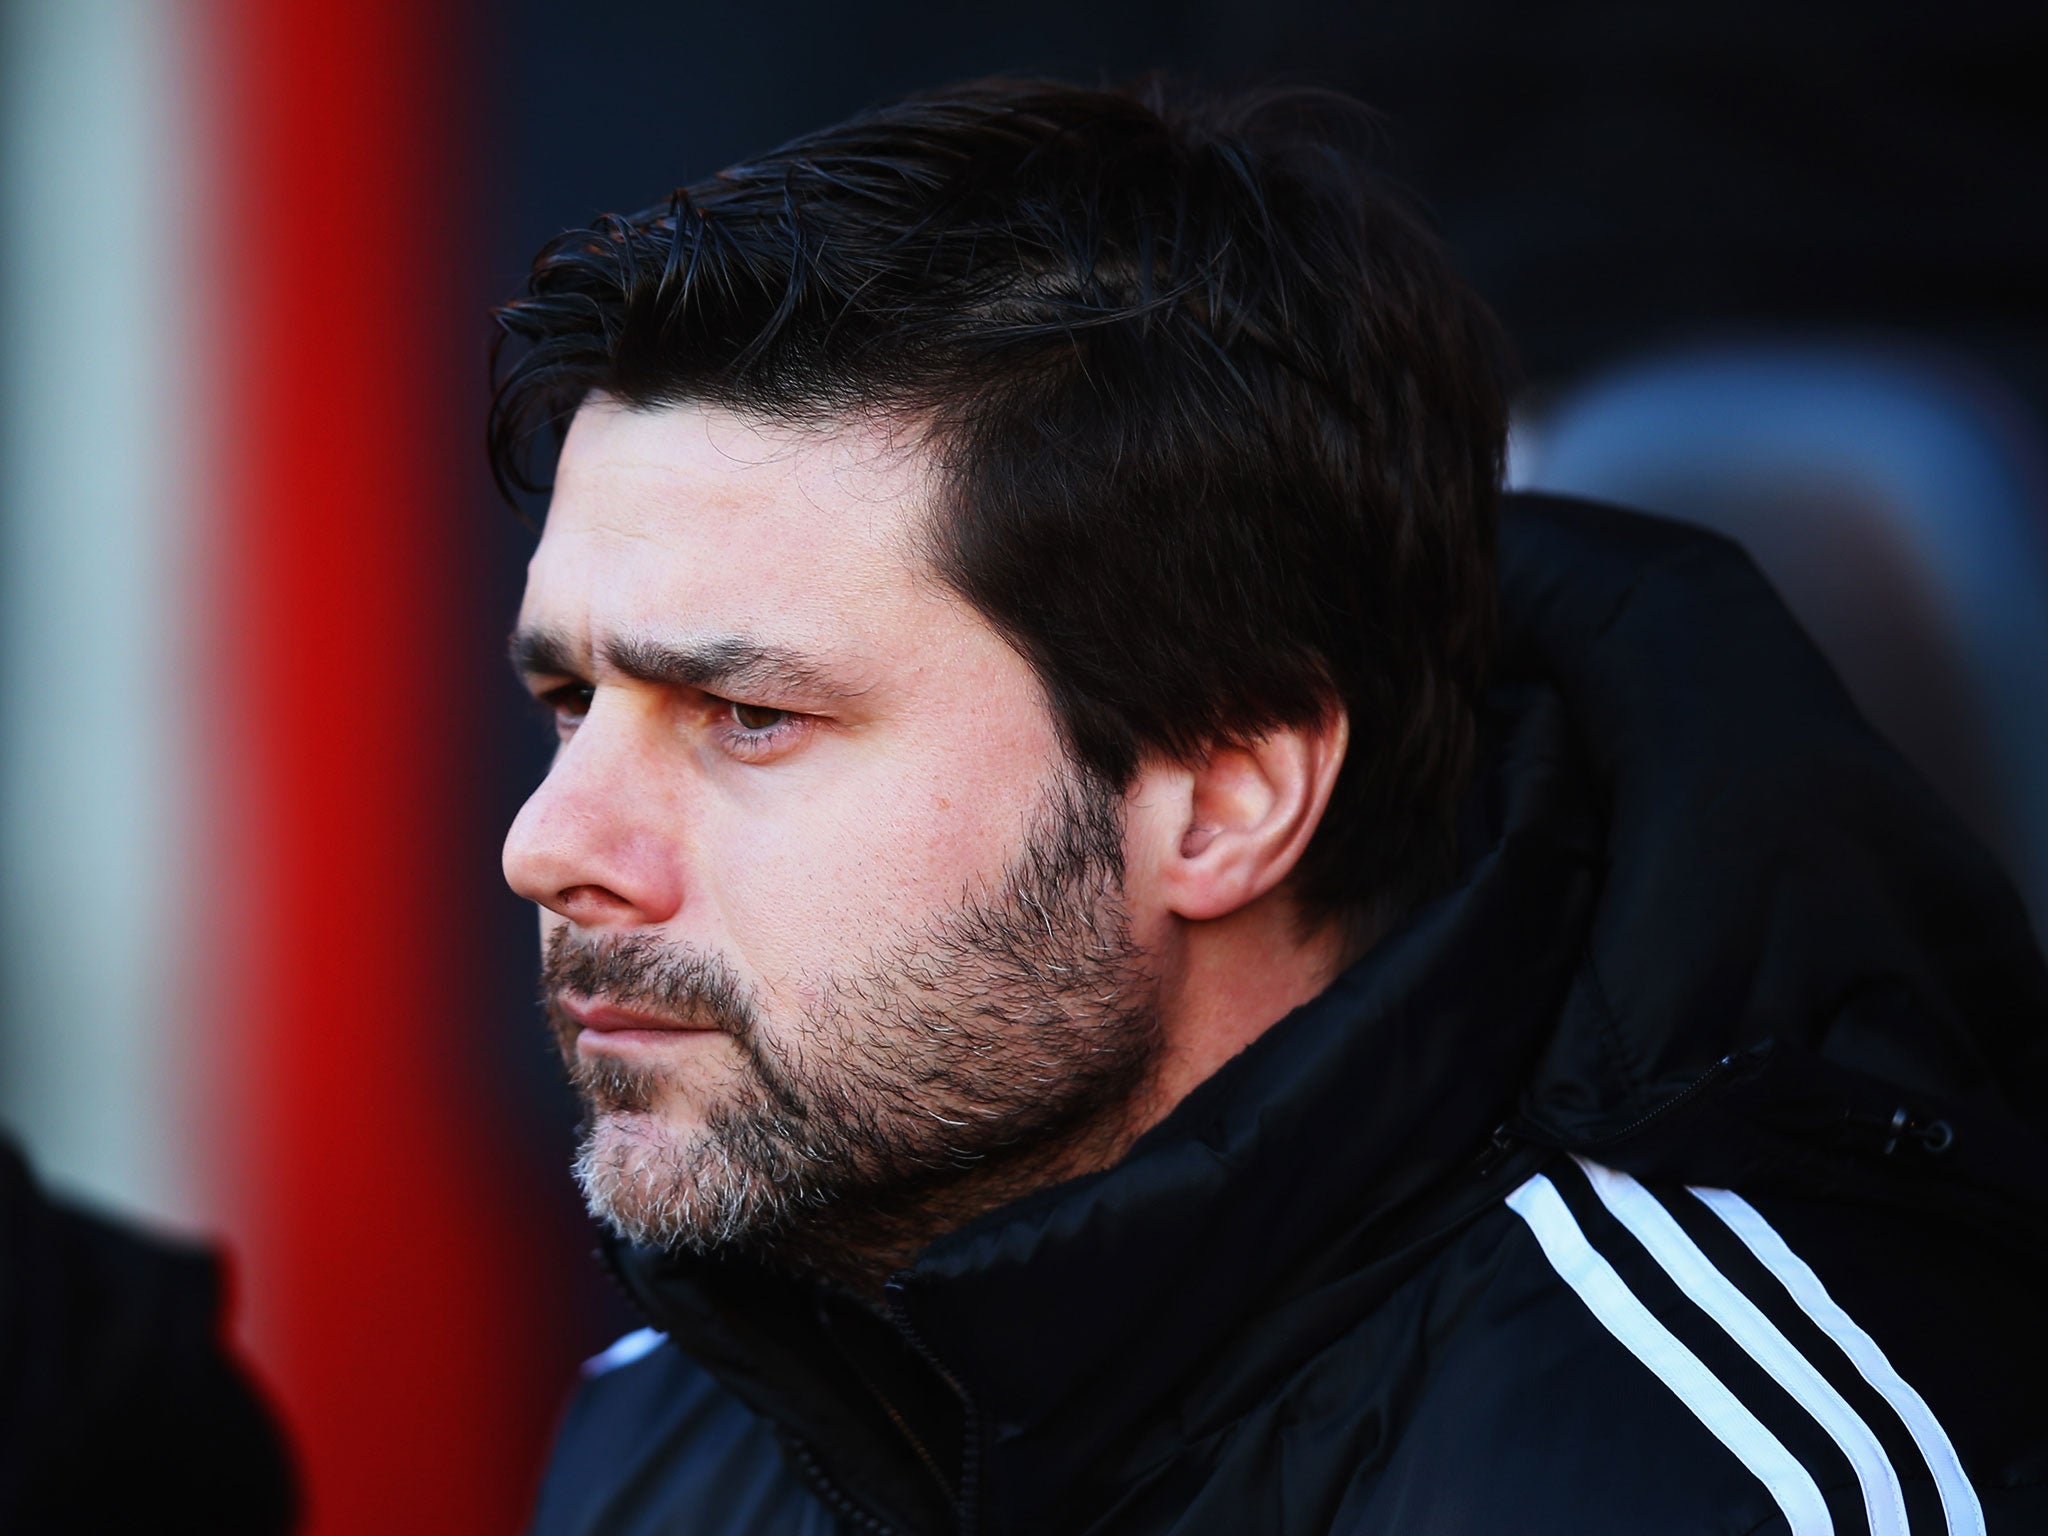 Southampton manager Mauricio Pochettino could choose to leave the club after the resignation of chairman Nicola Cortese on Wednesday